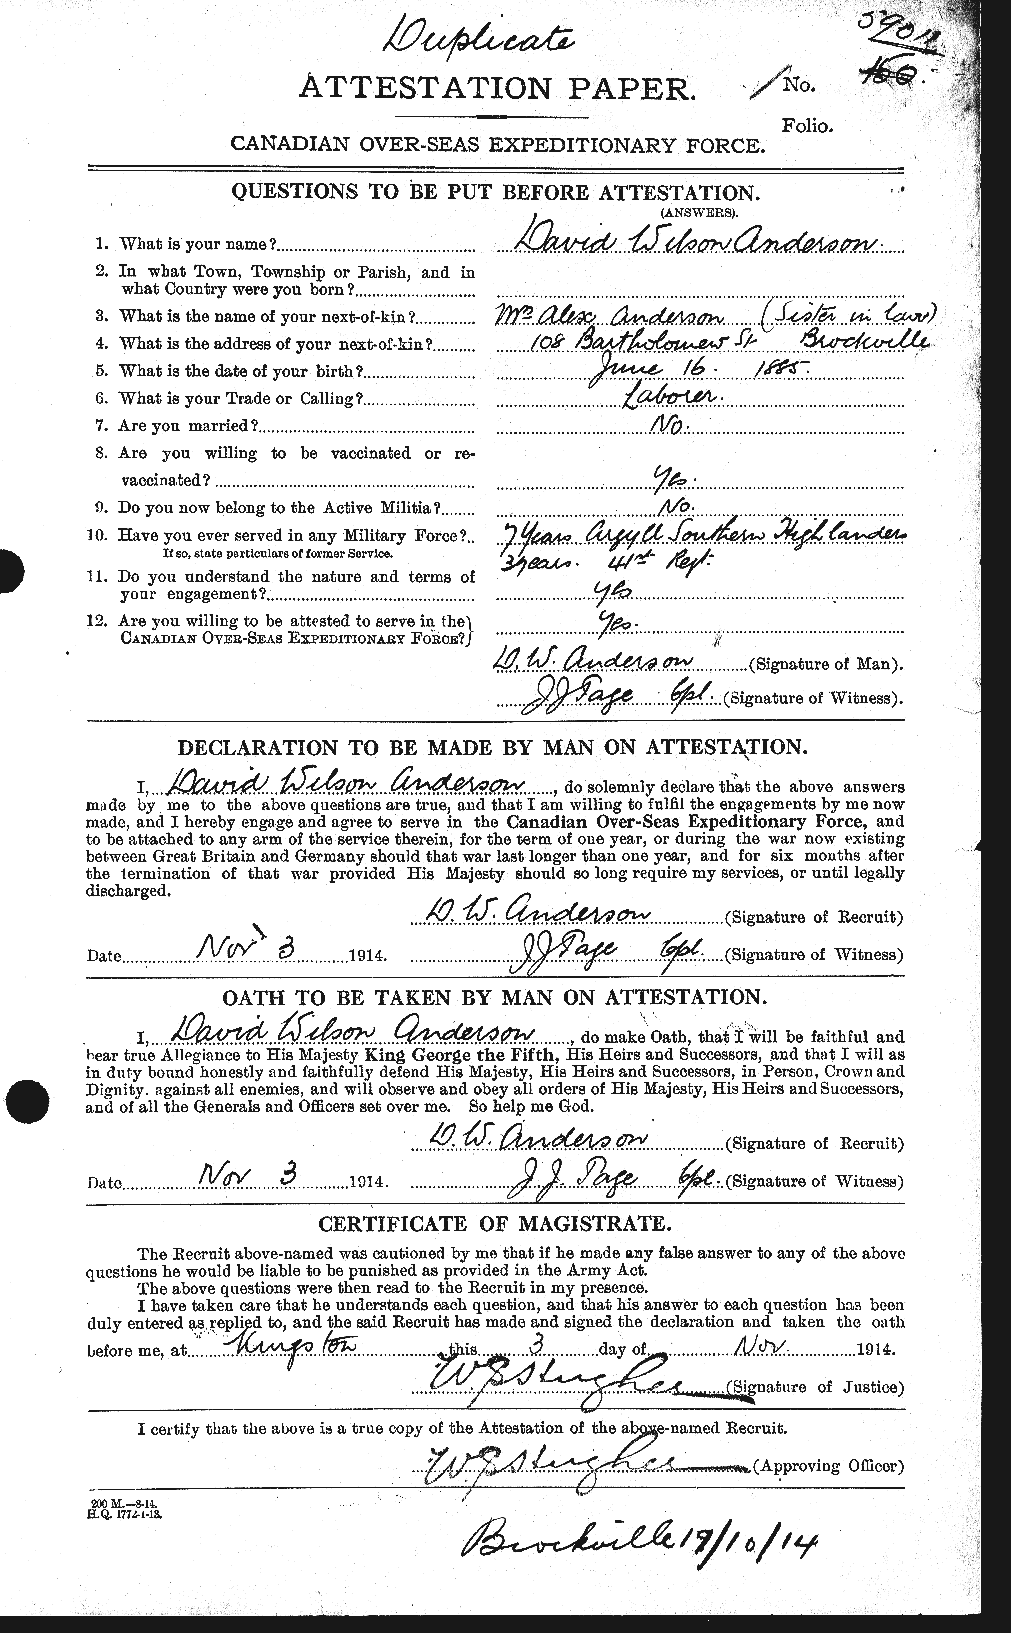 Personnel Records of the First World War - CEF 209995a